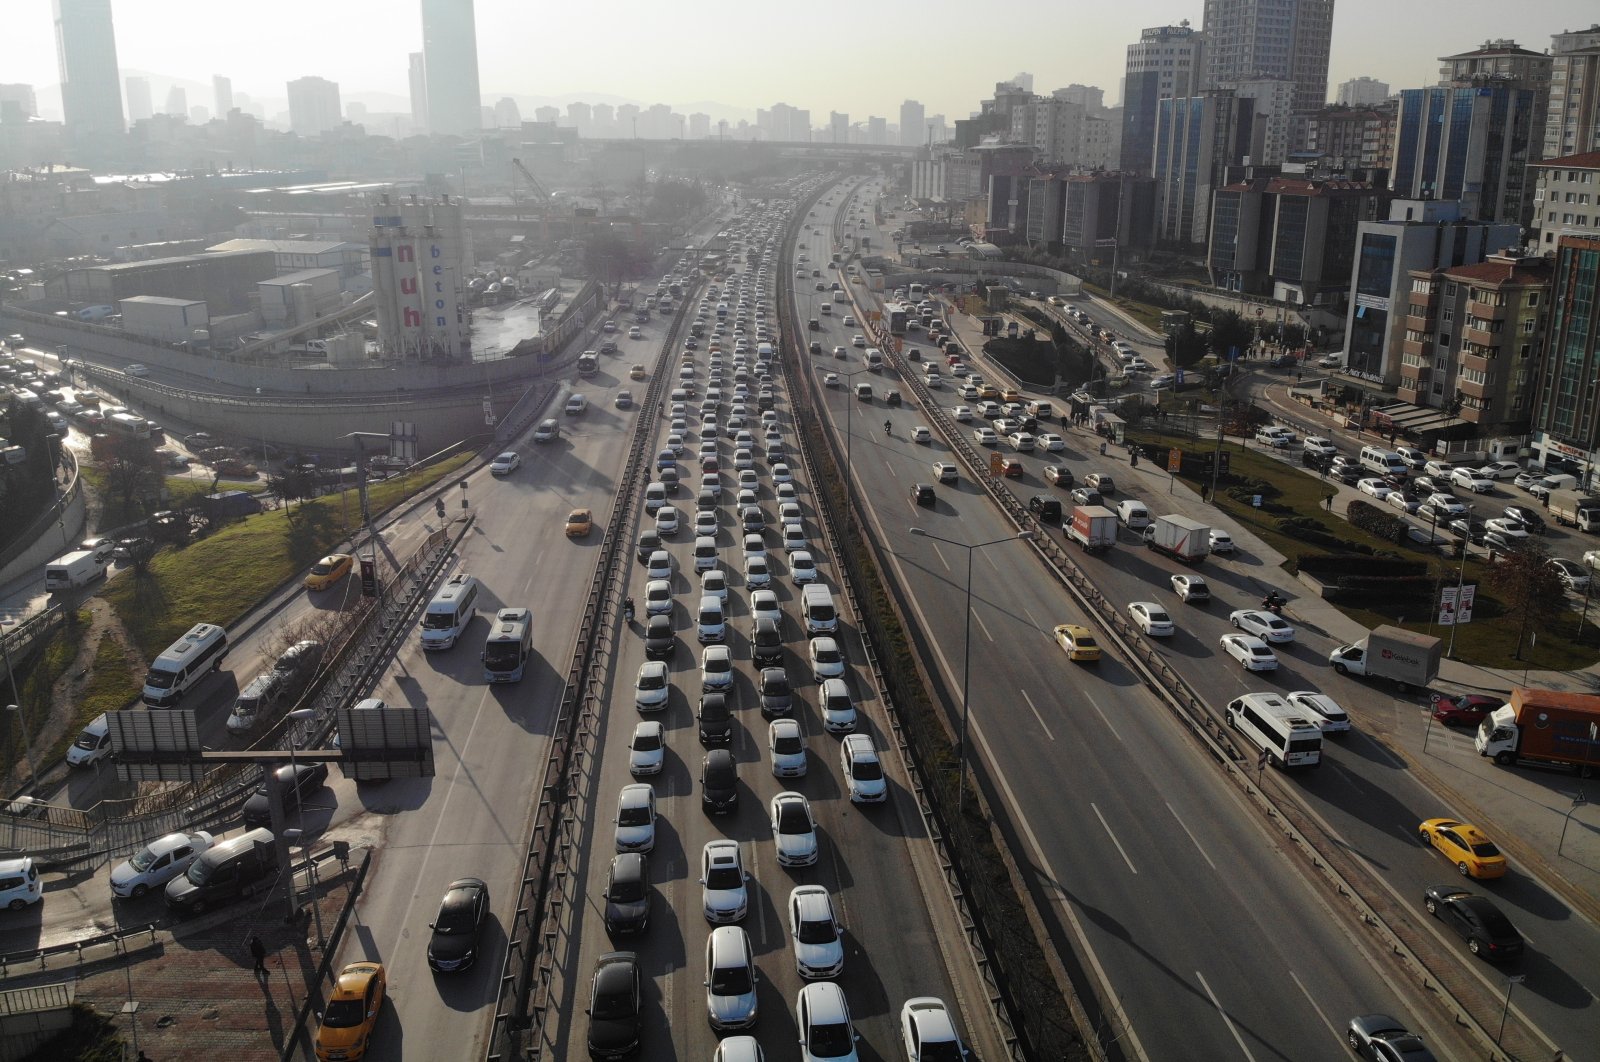 A view of traffic on the D-100 highway in Istanbul, Turkey, March 28, 2022. (IHA PHOTO)